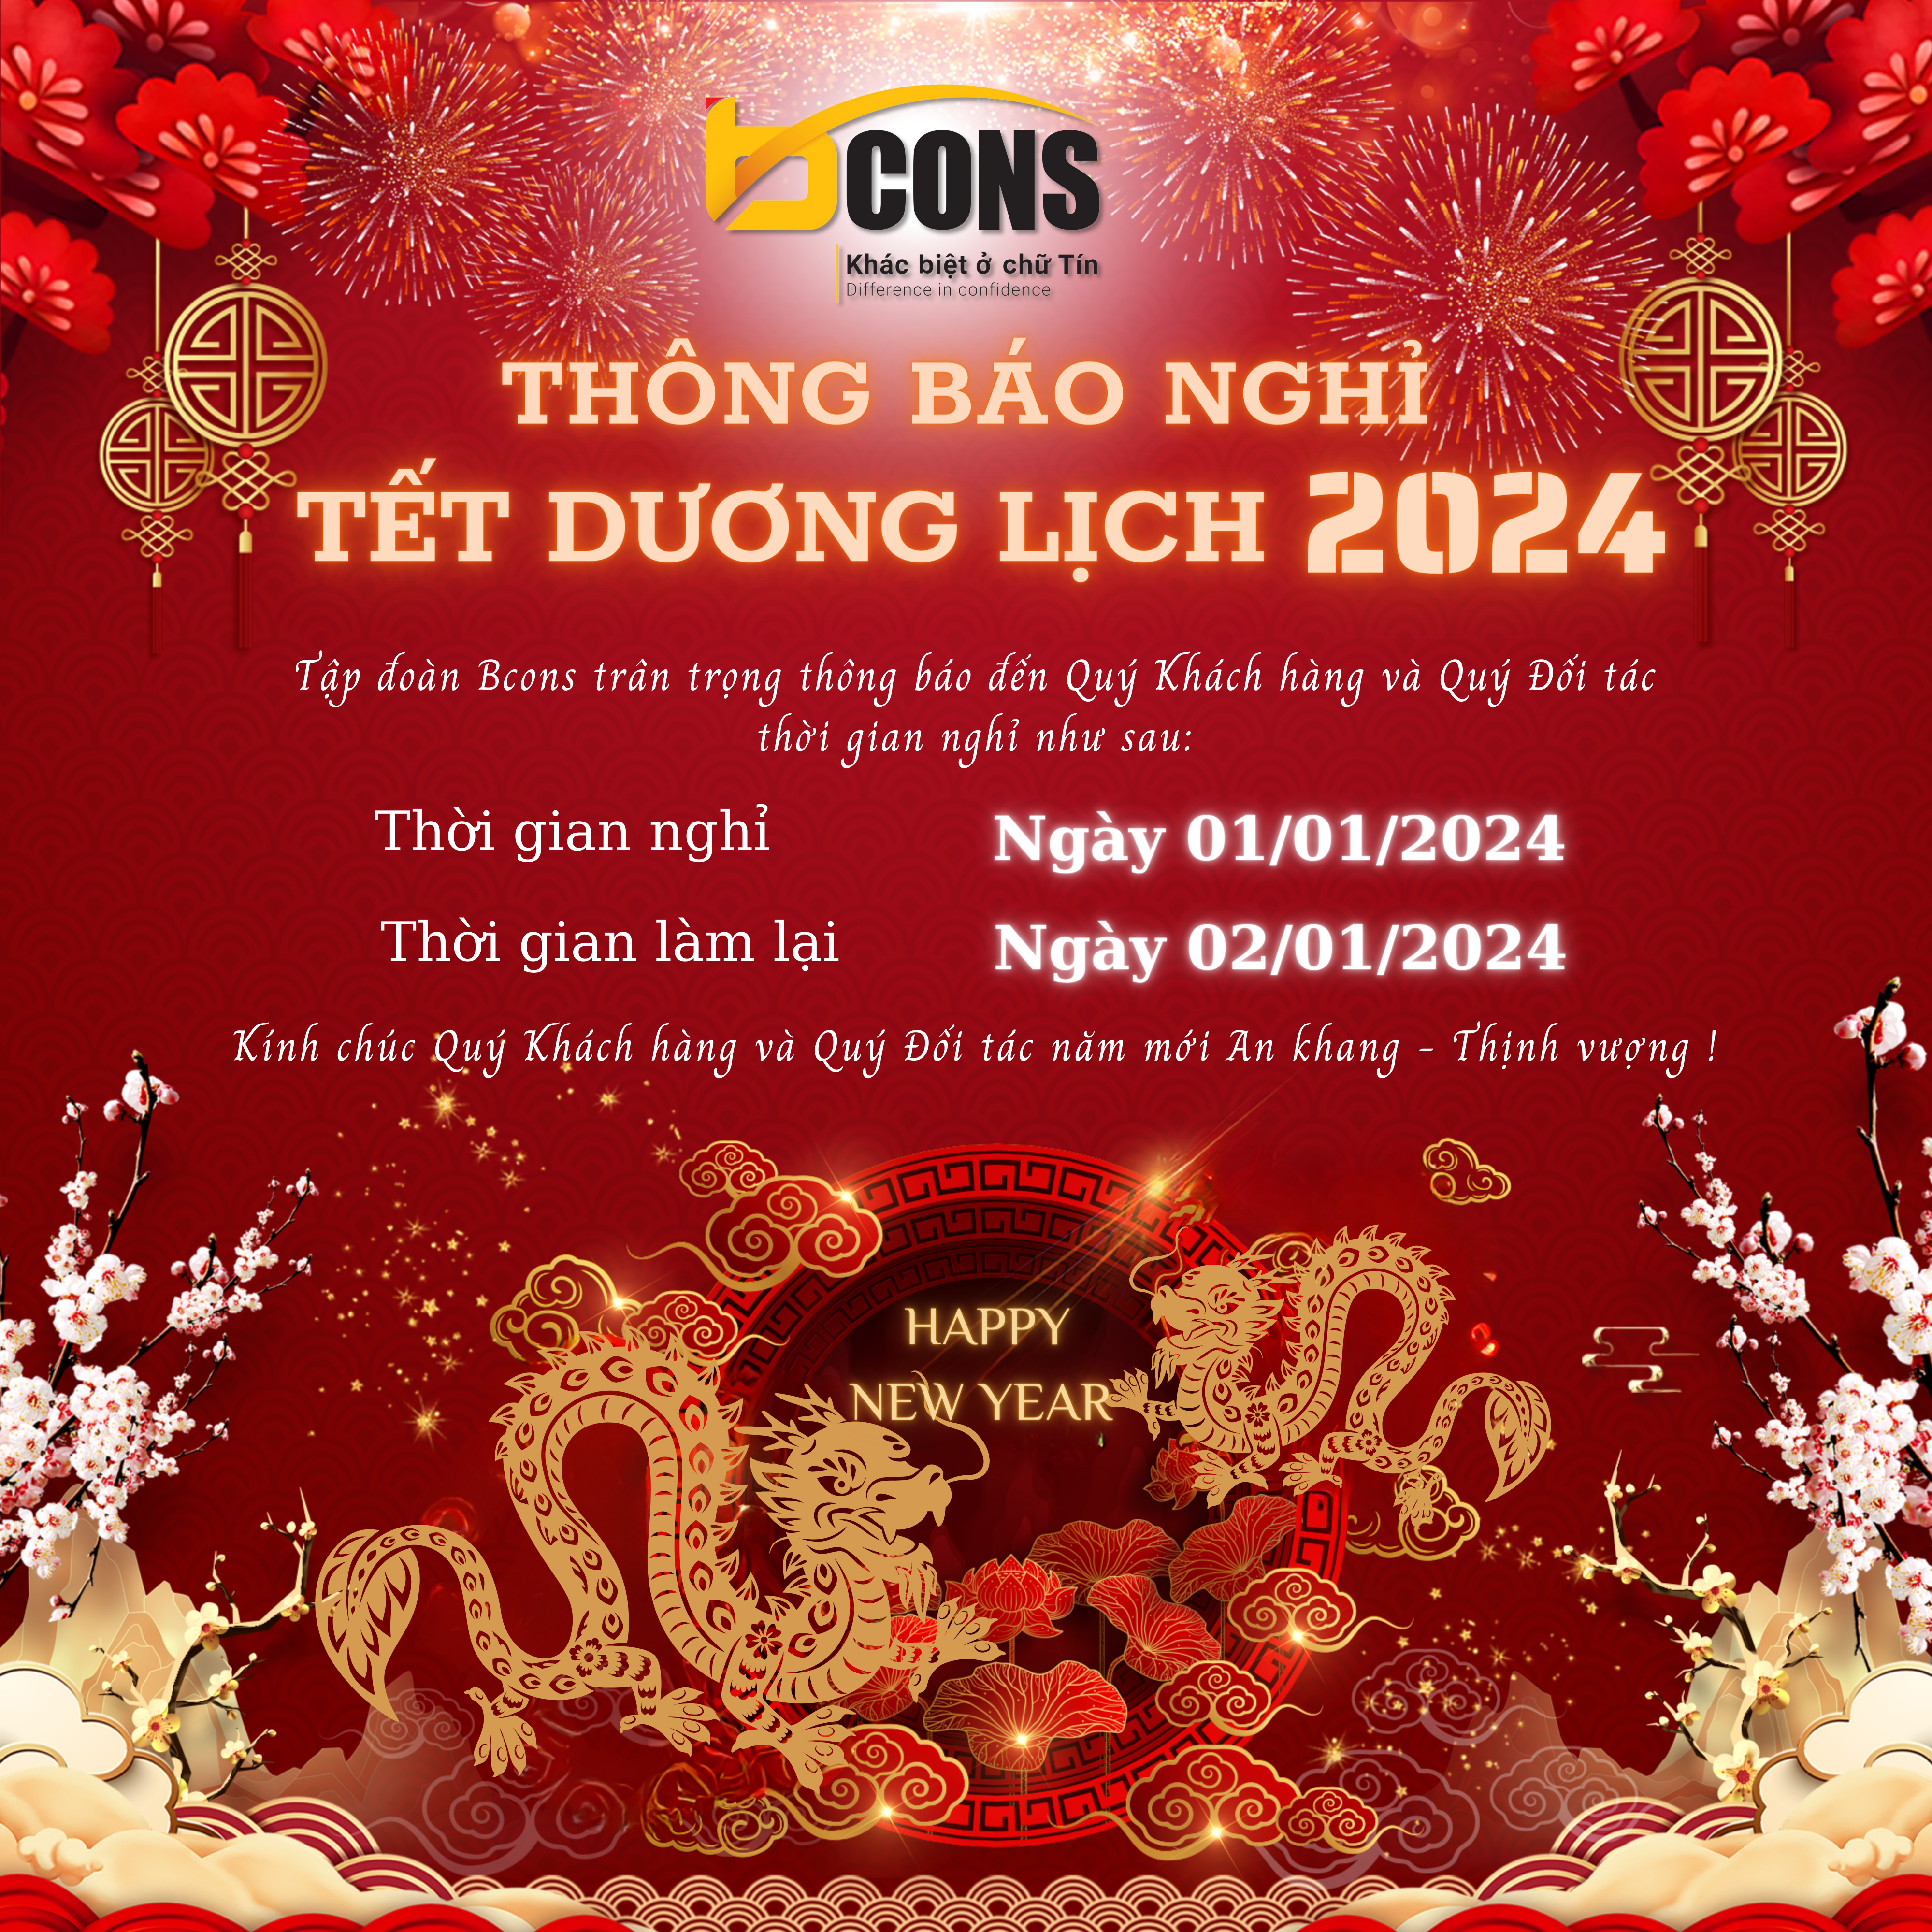 2023.12.15 Poster TB Nghi Tet duong lich